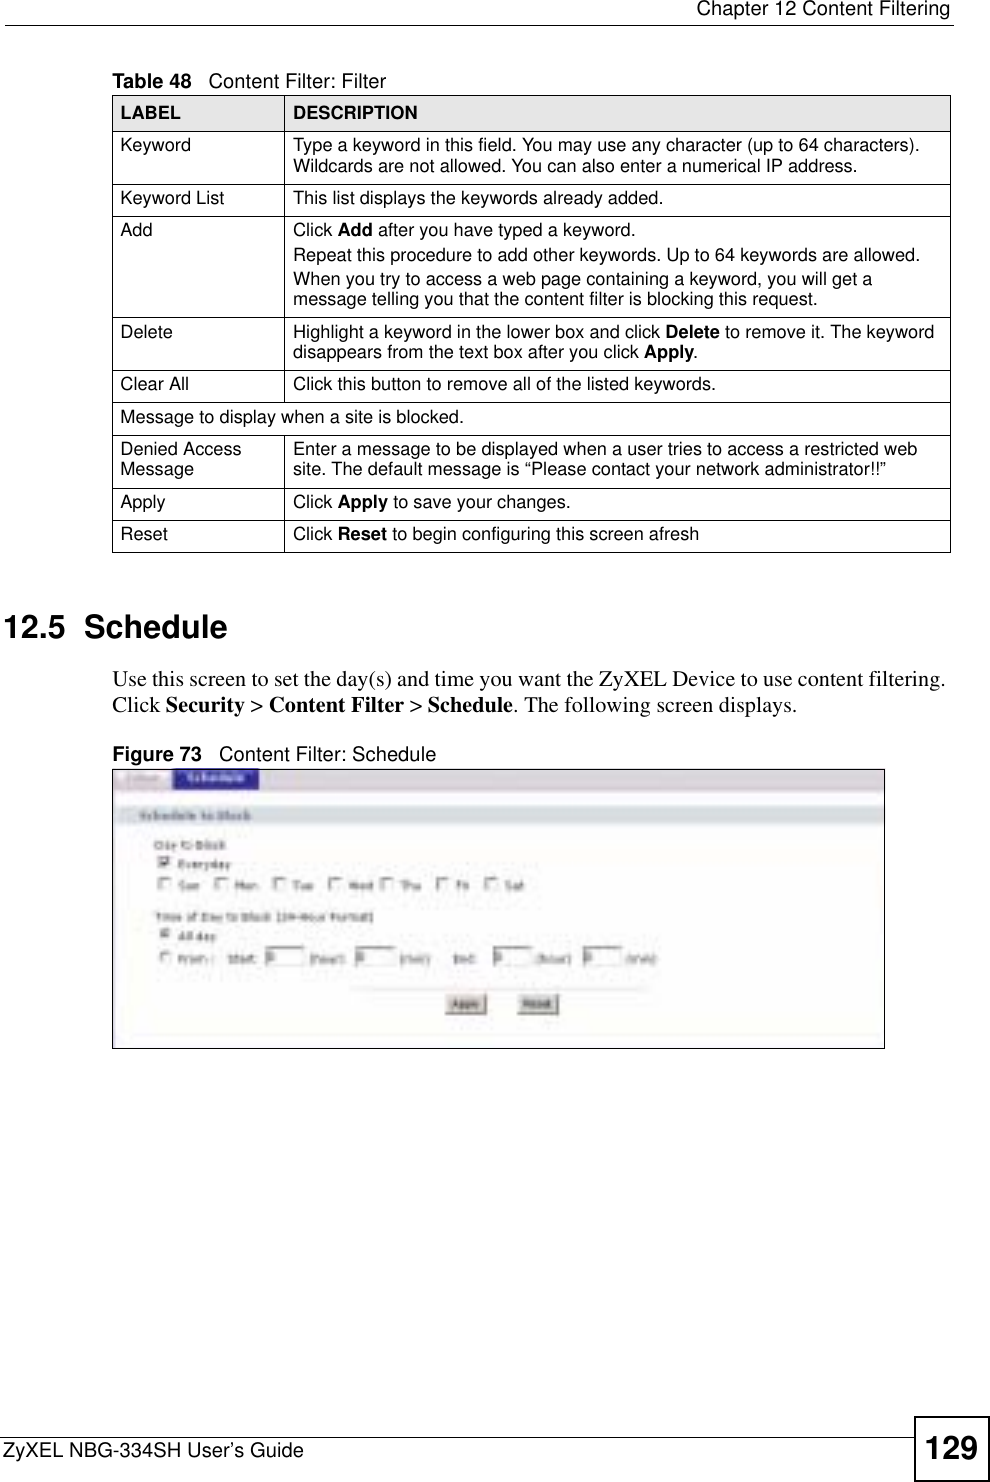  Chapter 12 Content FilteringZyXEL NBG-334SH User’s Guide 12912.5  ScheduleUse this screen to set the day(s) and time you want the ZyXEL Device to use content filtering. Click Security &gt; Content Filter &gt; Schedule. The following screen displays.Figure 73   Content Filter: ScheduleKeyword Type a keyword in this field. You may use any character (up to 64 characters). Wildcards are not allowed. You can also enter a numerical IP address.Keyword List This list displays the keywords already added. Add  Click Add after you have typed a keyword. Repeat this procedure to add other keywords. Up to 64 keywords are allowed.When you try to access a web page containing a keyword, you will get a message telling you that the content filter is blocking this request.Delete Highlight a keyword in the lower box and click Delete to remove it. The keyword disappears from the text box after you click Apply.Clear All Click this button to remove all of the listed keywords.Message to display when a site is blocked.Denied Access Message Enter a message to be displayed when a user tries to access a restricted web site. The default message is “Please contact your network administrator!!”Apply Click Apply to save your changes.Reset Click Reset to begin configuring this screen afreshTable 48   Content Filter: FilterLABEL DESCRIPTION